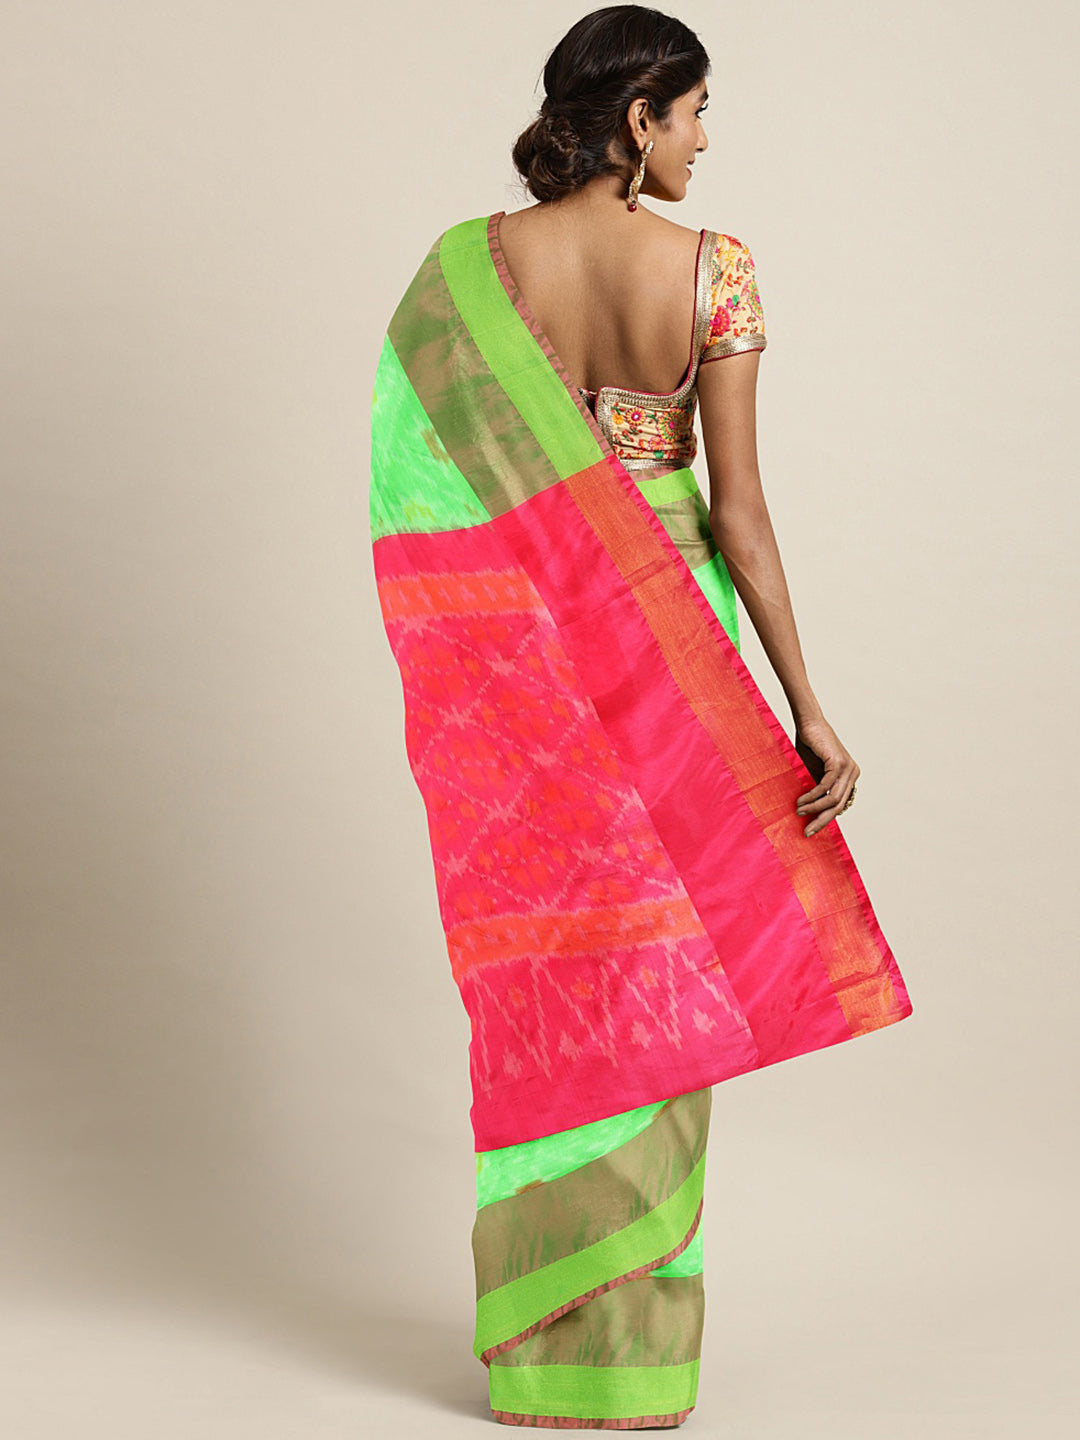 Kalakari India Upppada Silk Woven Saree With Blouse SKHSSA0012-Saree-Kalakari India-SKHSSA0012-Bollywood, Geographical Indication, Hand Crafted, Heritage Prints, Natural Dyes, Sarees, South Silk, Sustainable Fabrics, Uppada Silk, Woven-[Linen,Ethnic,wear,Fashionista,Handloom,Handicraft,Indigo,blockprint,block,print,Cotton,Chanderi,Blue, latest,classy,party,bollywood,trendy,summer,style,traditional,formal,elegant,unique,style,hand,block,print, dabu,booti,gift,present,glamorous,affordable,collecti